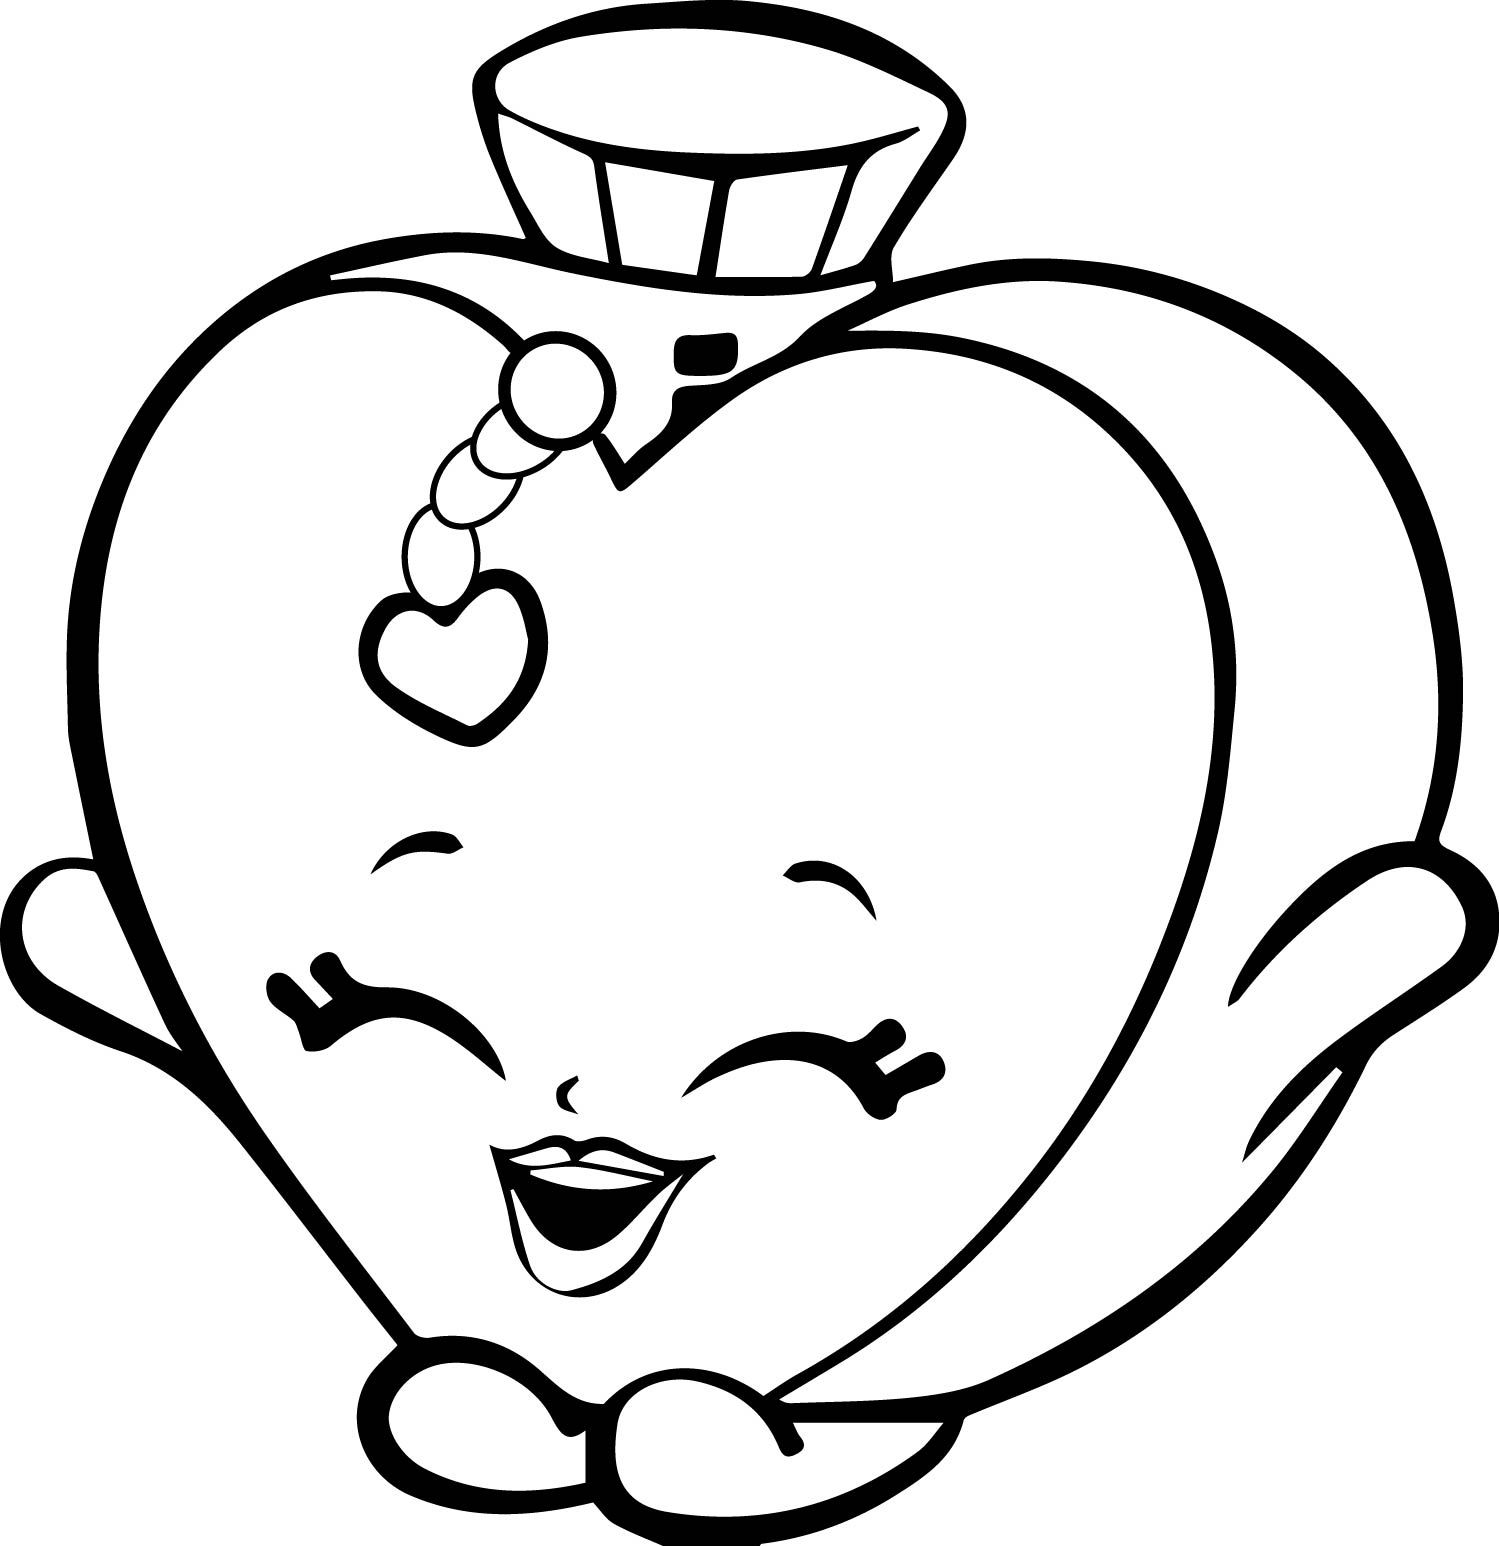 heart-shopkin-coloring-page-free-printable-coloring-pages-for-kids